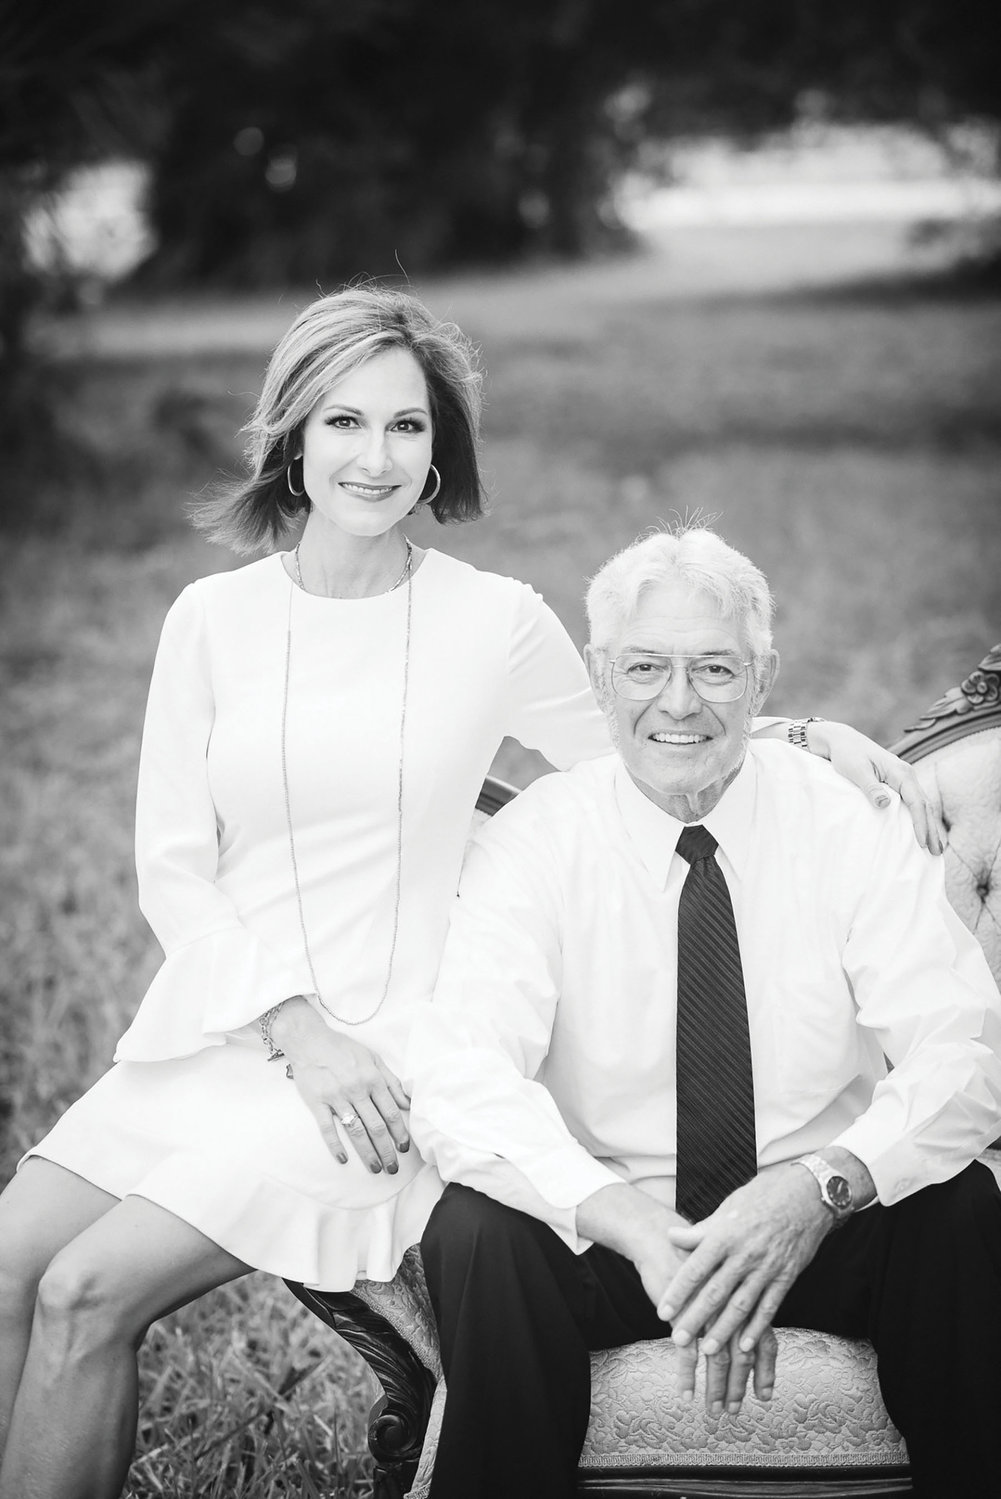 Dr. Roger Davis started Family Dentistry in 1971, and his daughter Dr. Jennifer Laskey purchased the practice after he retired.